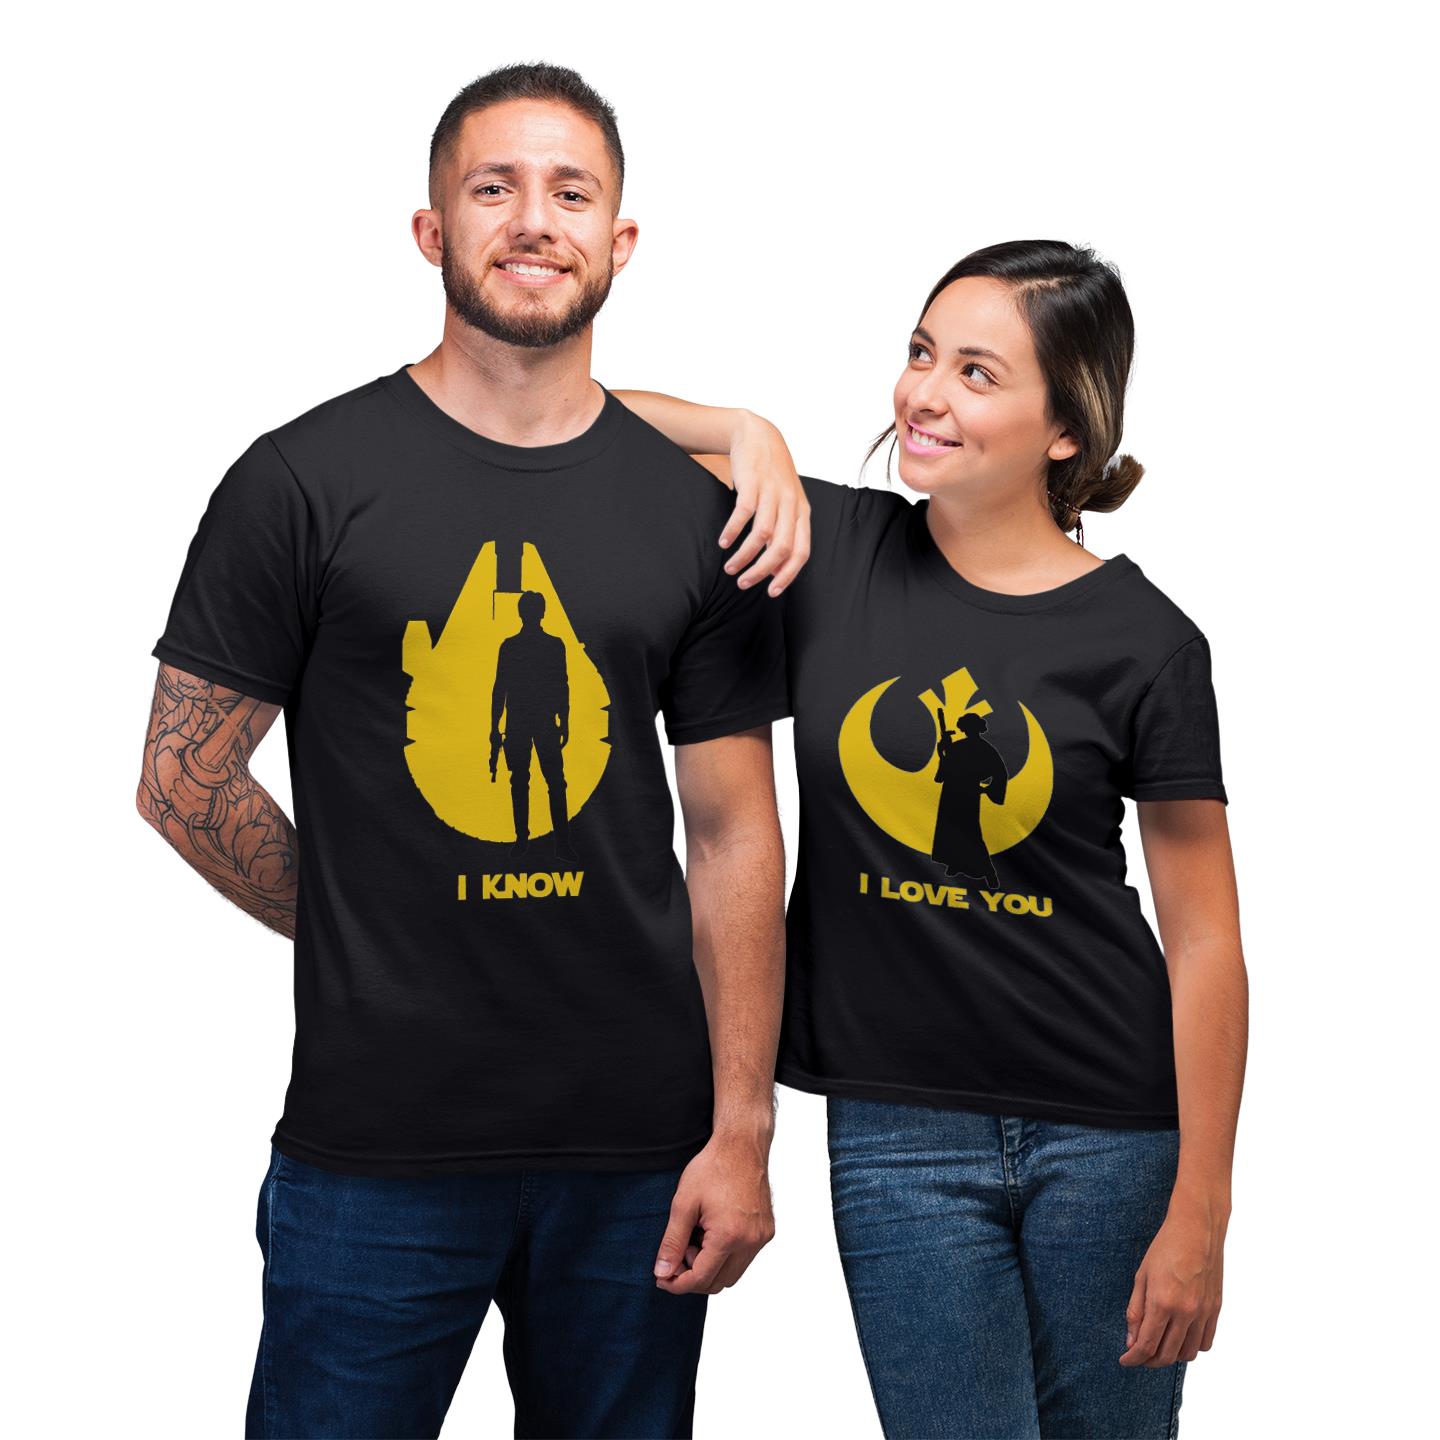 I Love You I Know Shirts. For Couple Love Matching T-Shirt